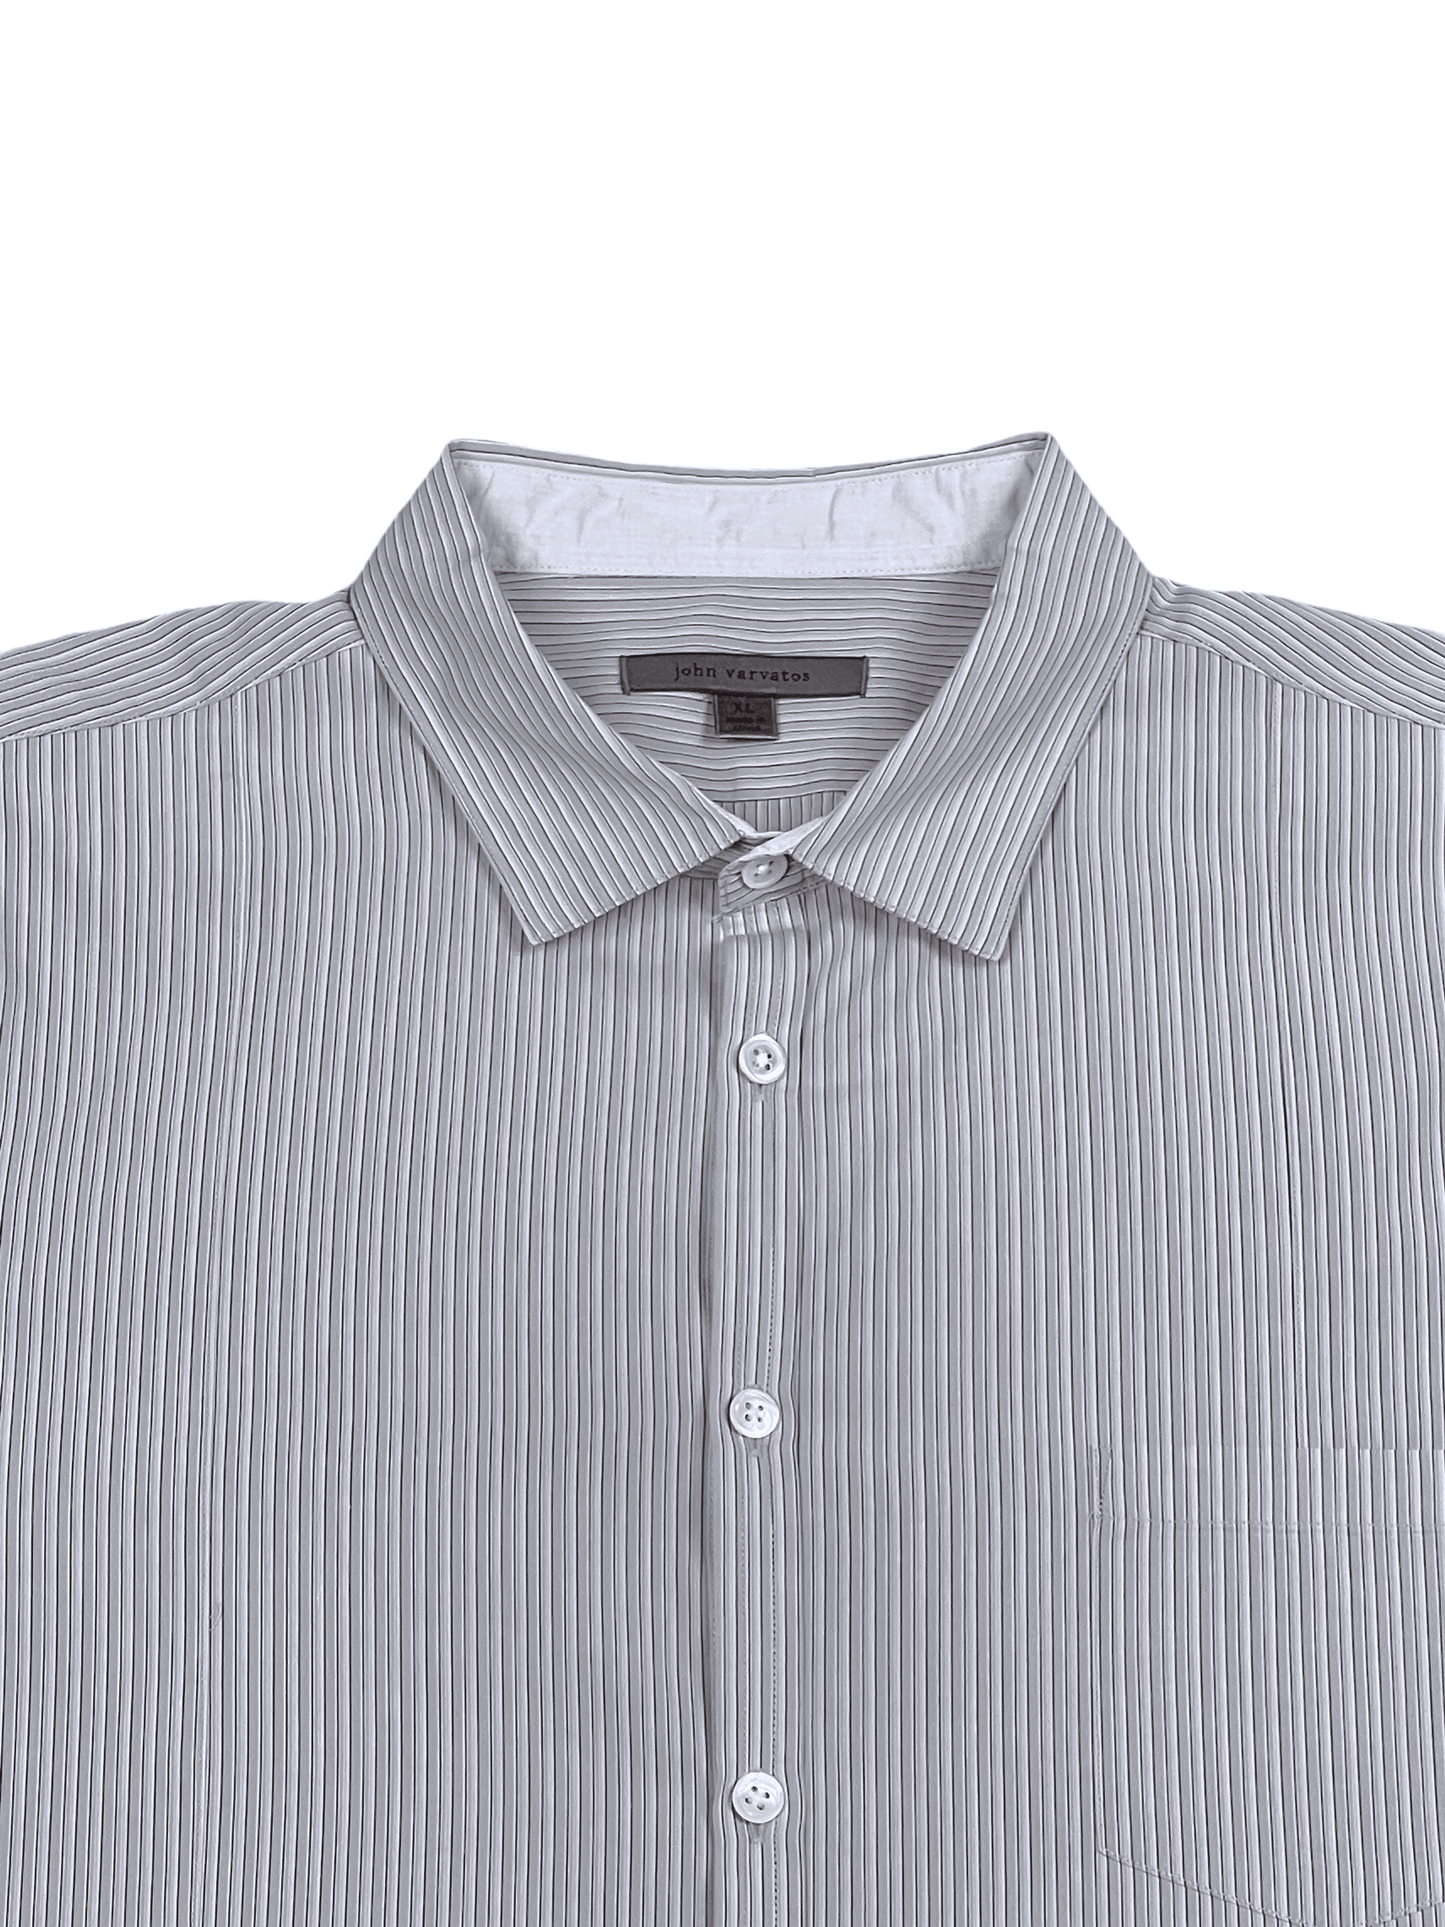 John Varvatos Collection Grey Striped Shirt XL - Genuine Design Luxury Consignment for Men. New & Pre-Owned Clothing, Shoes, & Accessories. Calgary, Canada